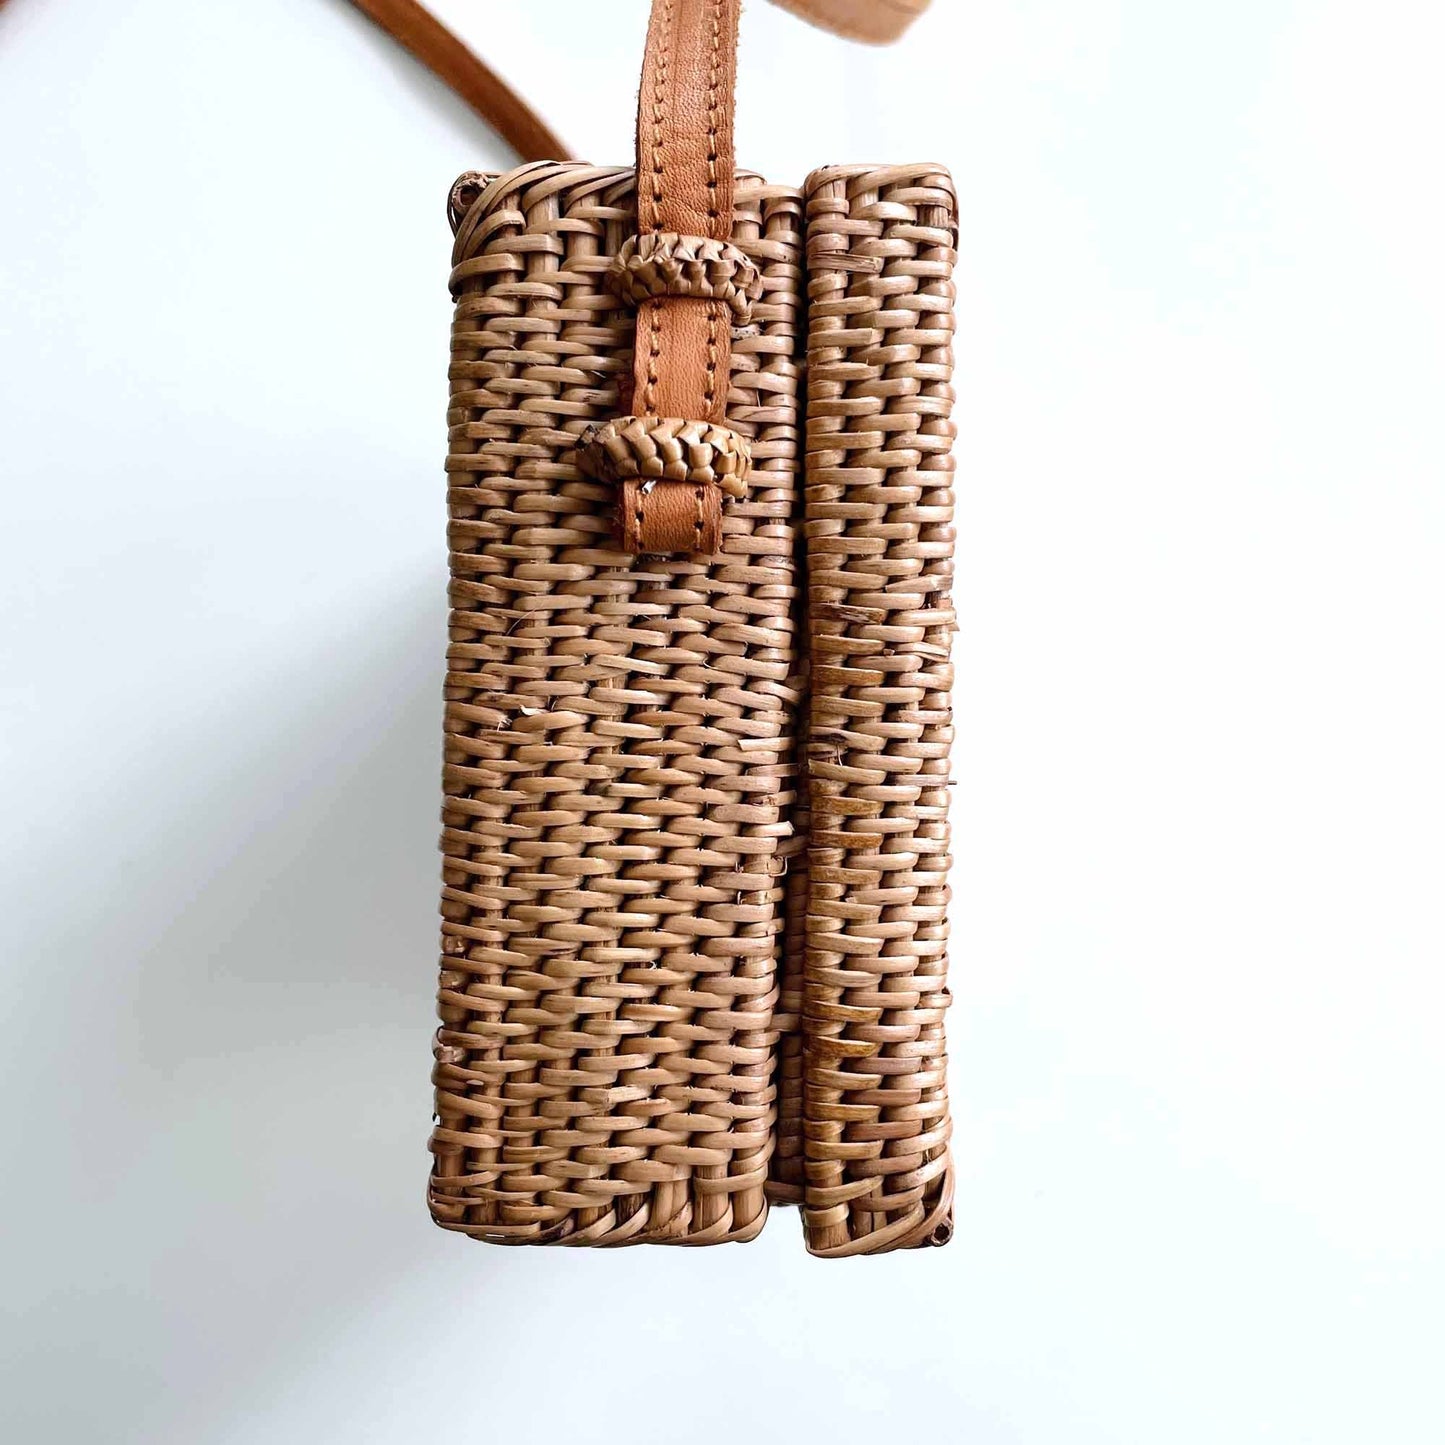 woven basket rattan crossbody bag with leather strap